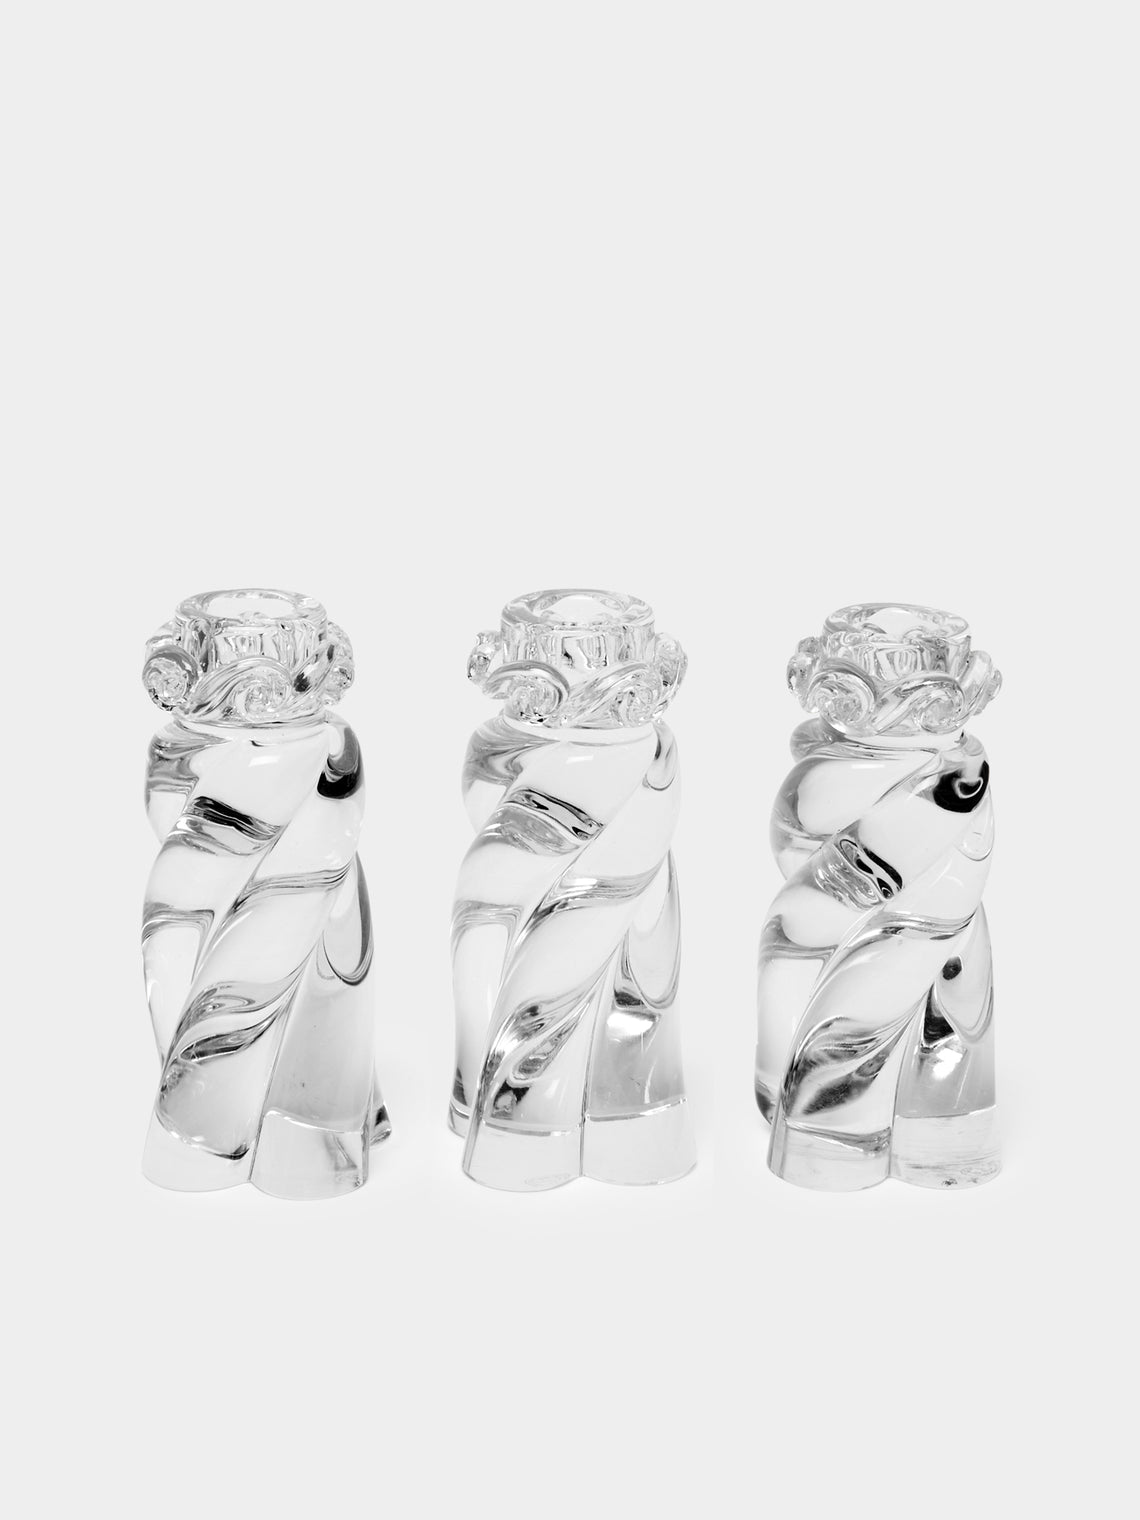 Antique and Vintage - 1920s Baccarat Crystal Candle Holders (Set of 3) -  - ABASK - 